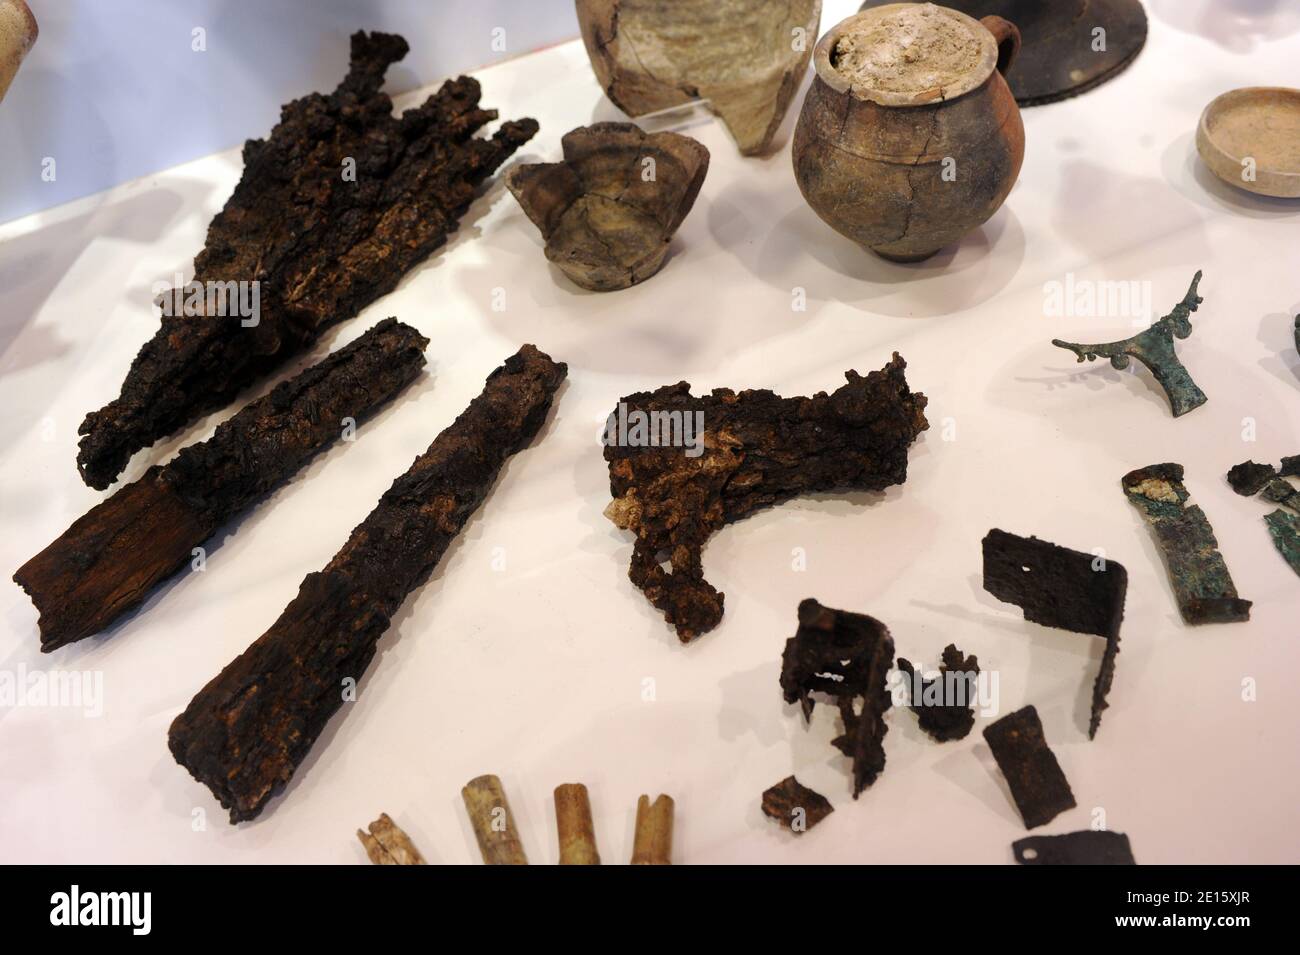 Objects found on the floor of residential rooms and in the layers of fire damage after Rome has been consumed by flames in 64 AD are pictured at the exhibit 'Nerone', examining the life and dark legends of Emperor Nero (37-68 AD), which opens in Rome ,Italy on April 12, 2011 across five different landmarks of the ancient imperial capital. Nero has been infamous throughout history for tyranny, extravagance, cold-blooded murder, and cruel persecution of Christians. Ancient Roman historians accused him of killing his mother, stepbrother and two wives, and of burning Christians at night in his gar Stock Photo